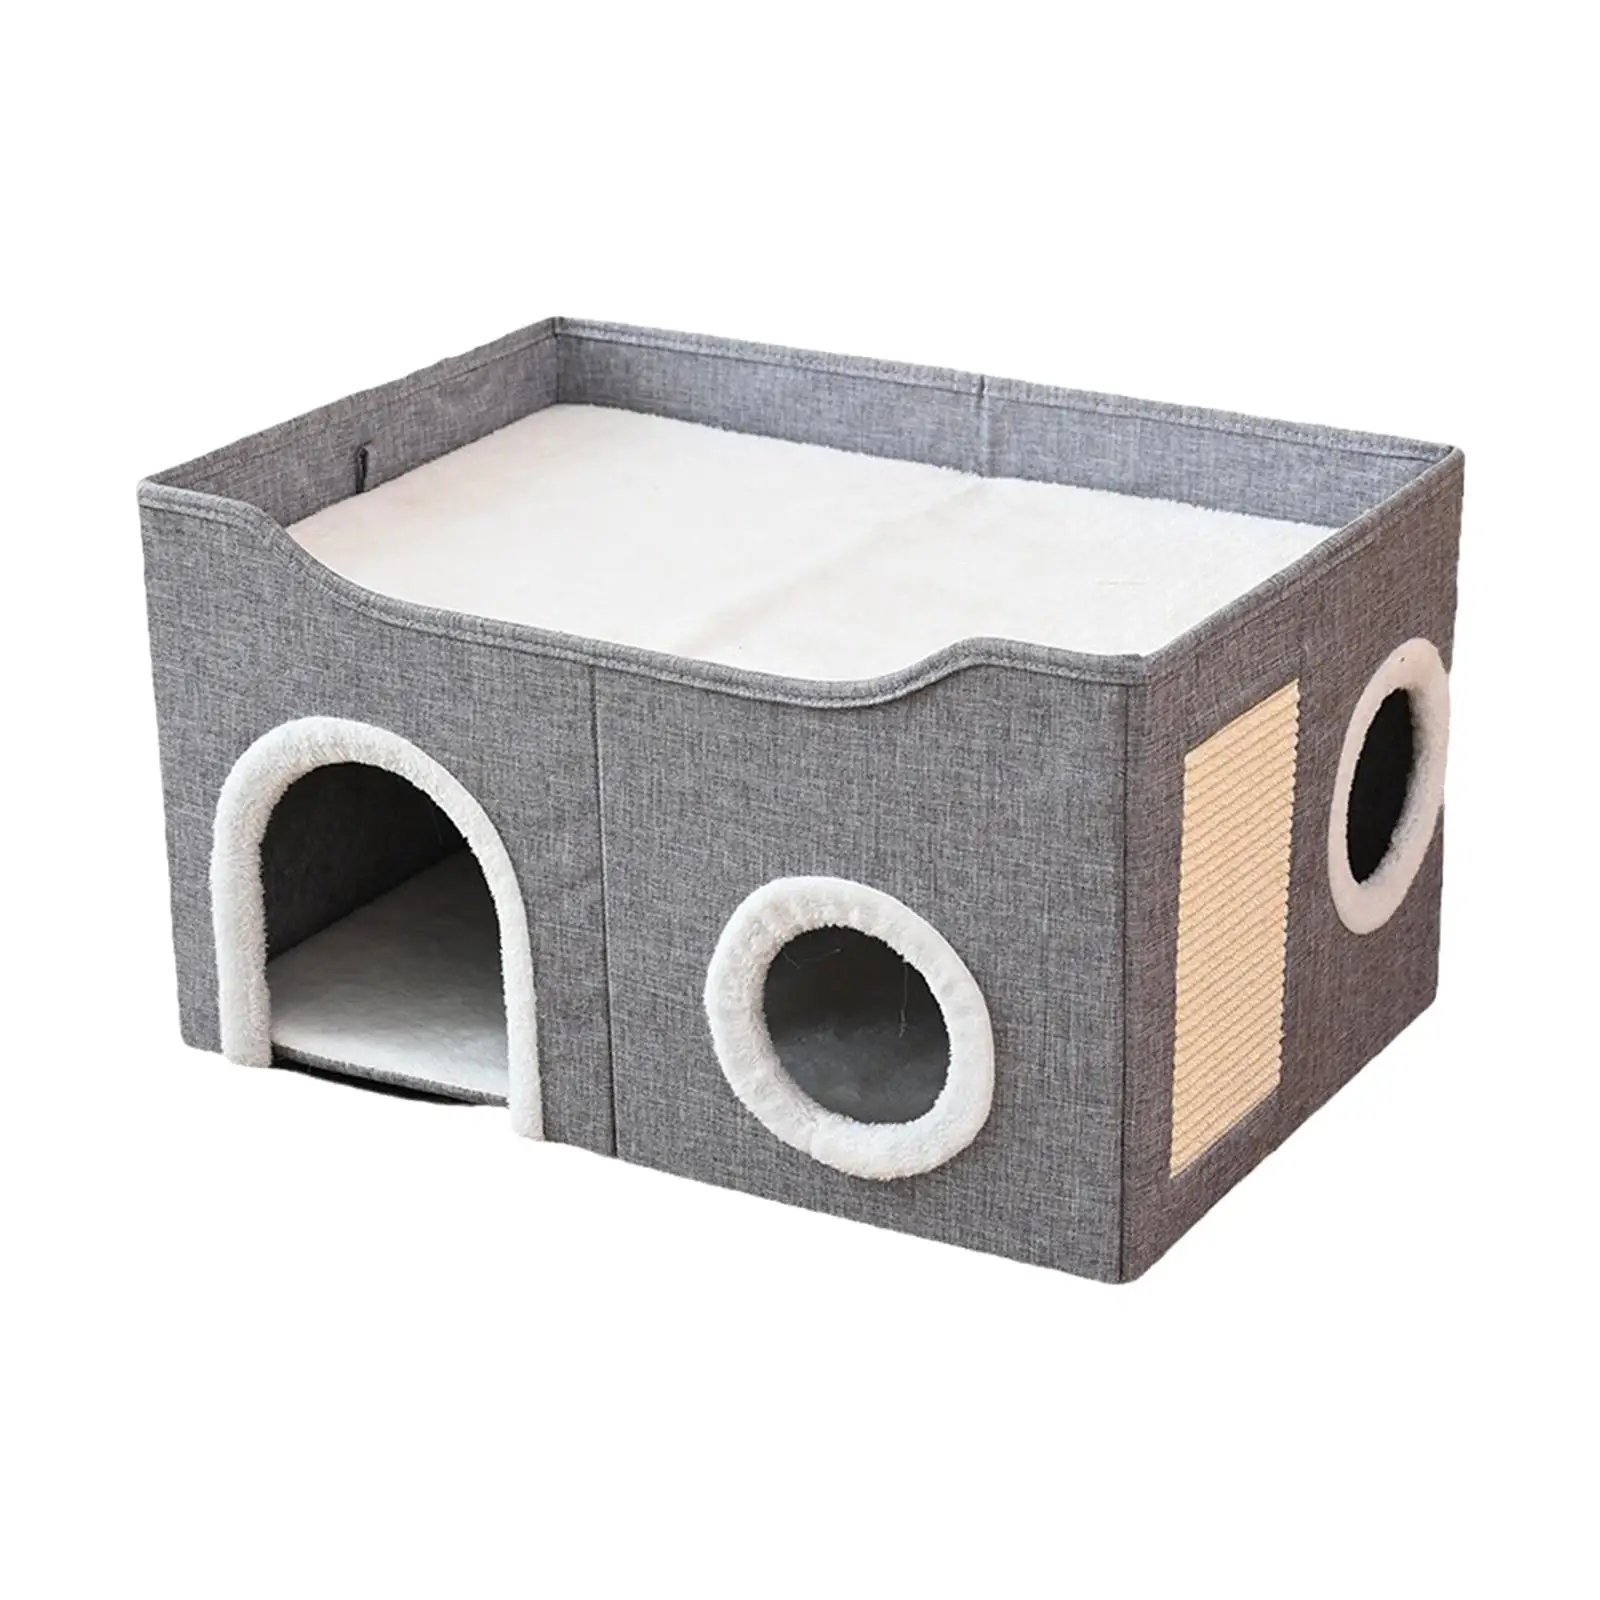 Covered Cat Bed Foldable Cat Houses & Condos Kitty Cave Bed Cat Hideaway for Cats Large Kitty Small Animals Pets New Years Gifts